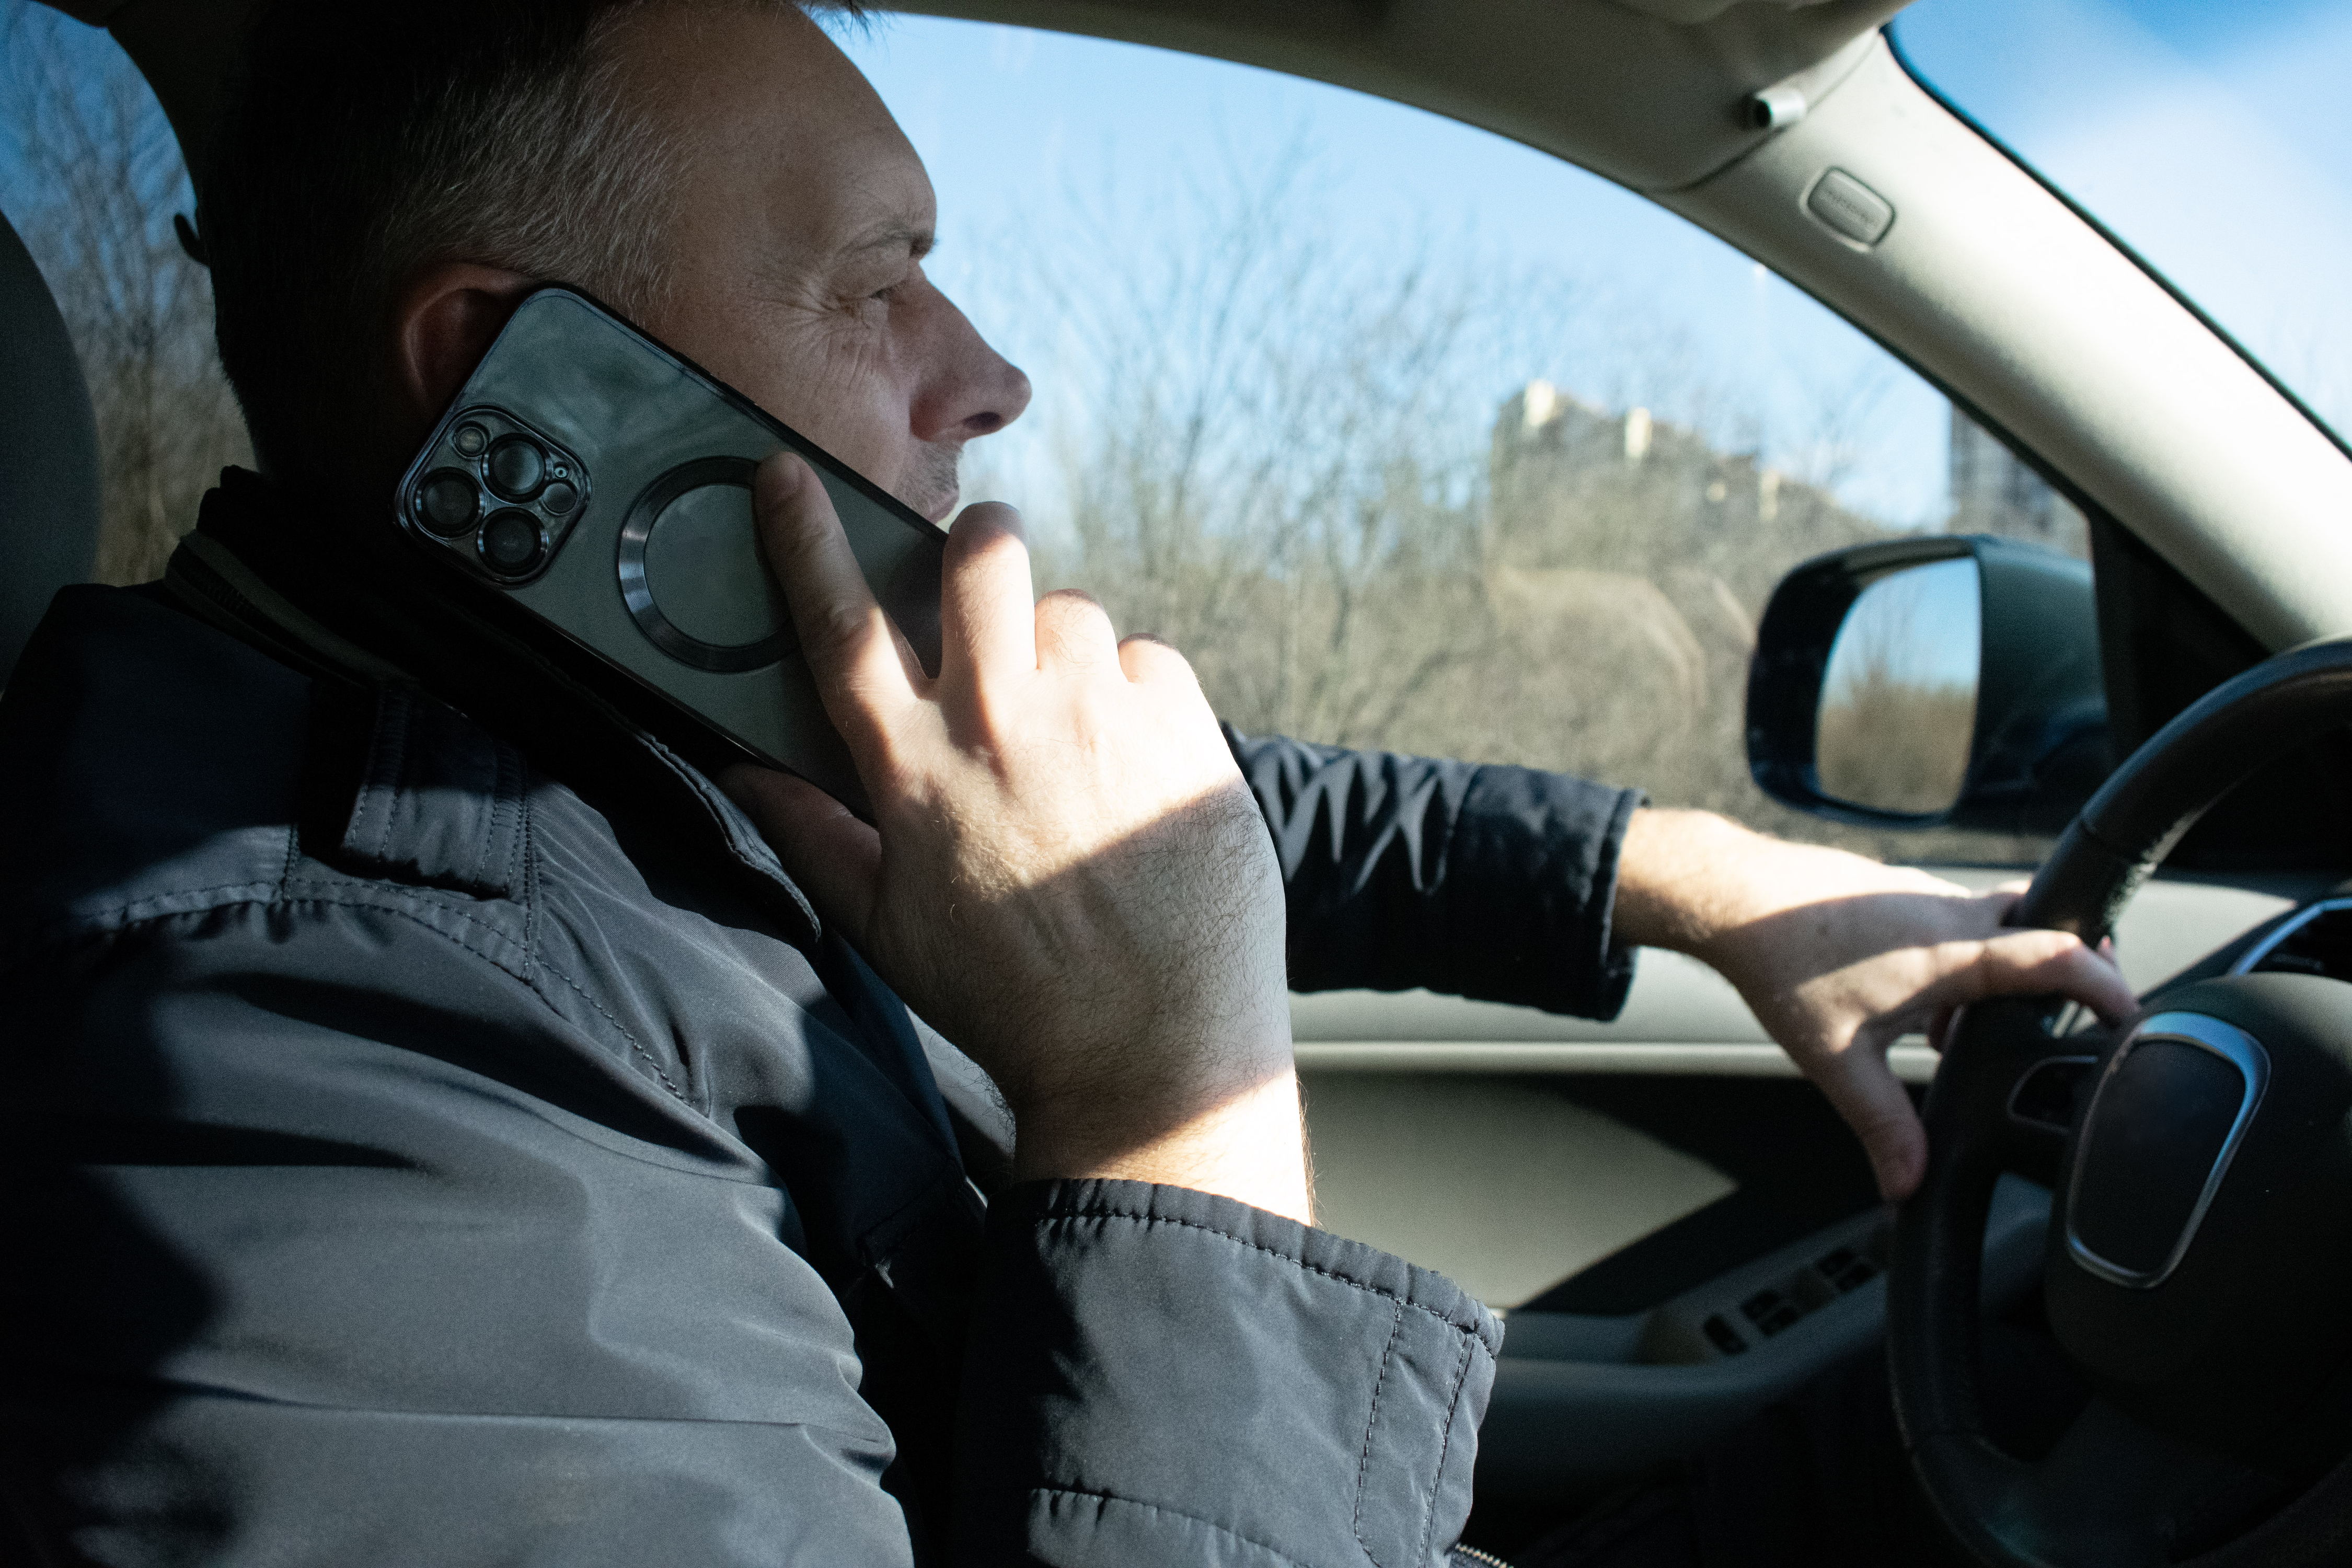 Pa. governor expected to sign bill that would issue fines to drivers using handheld phones